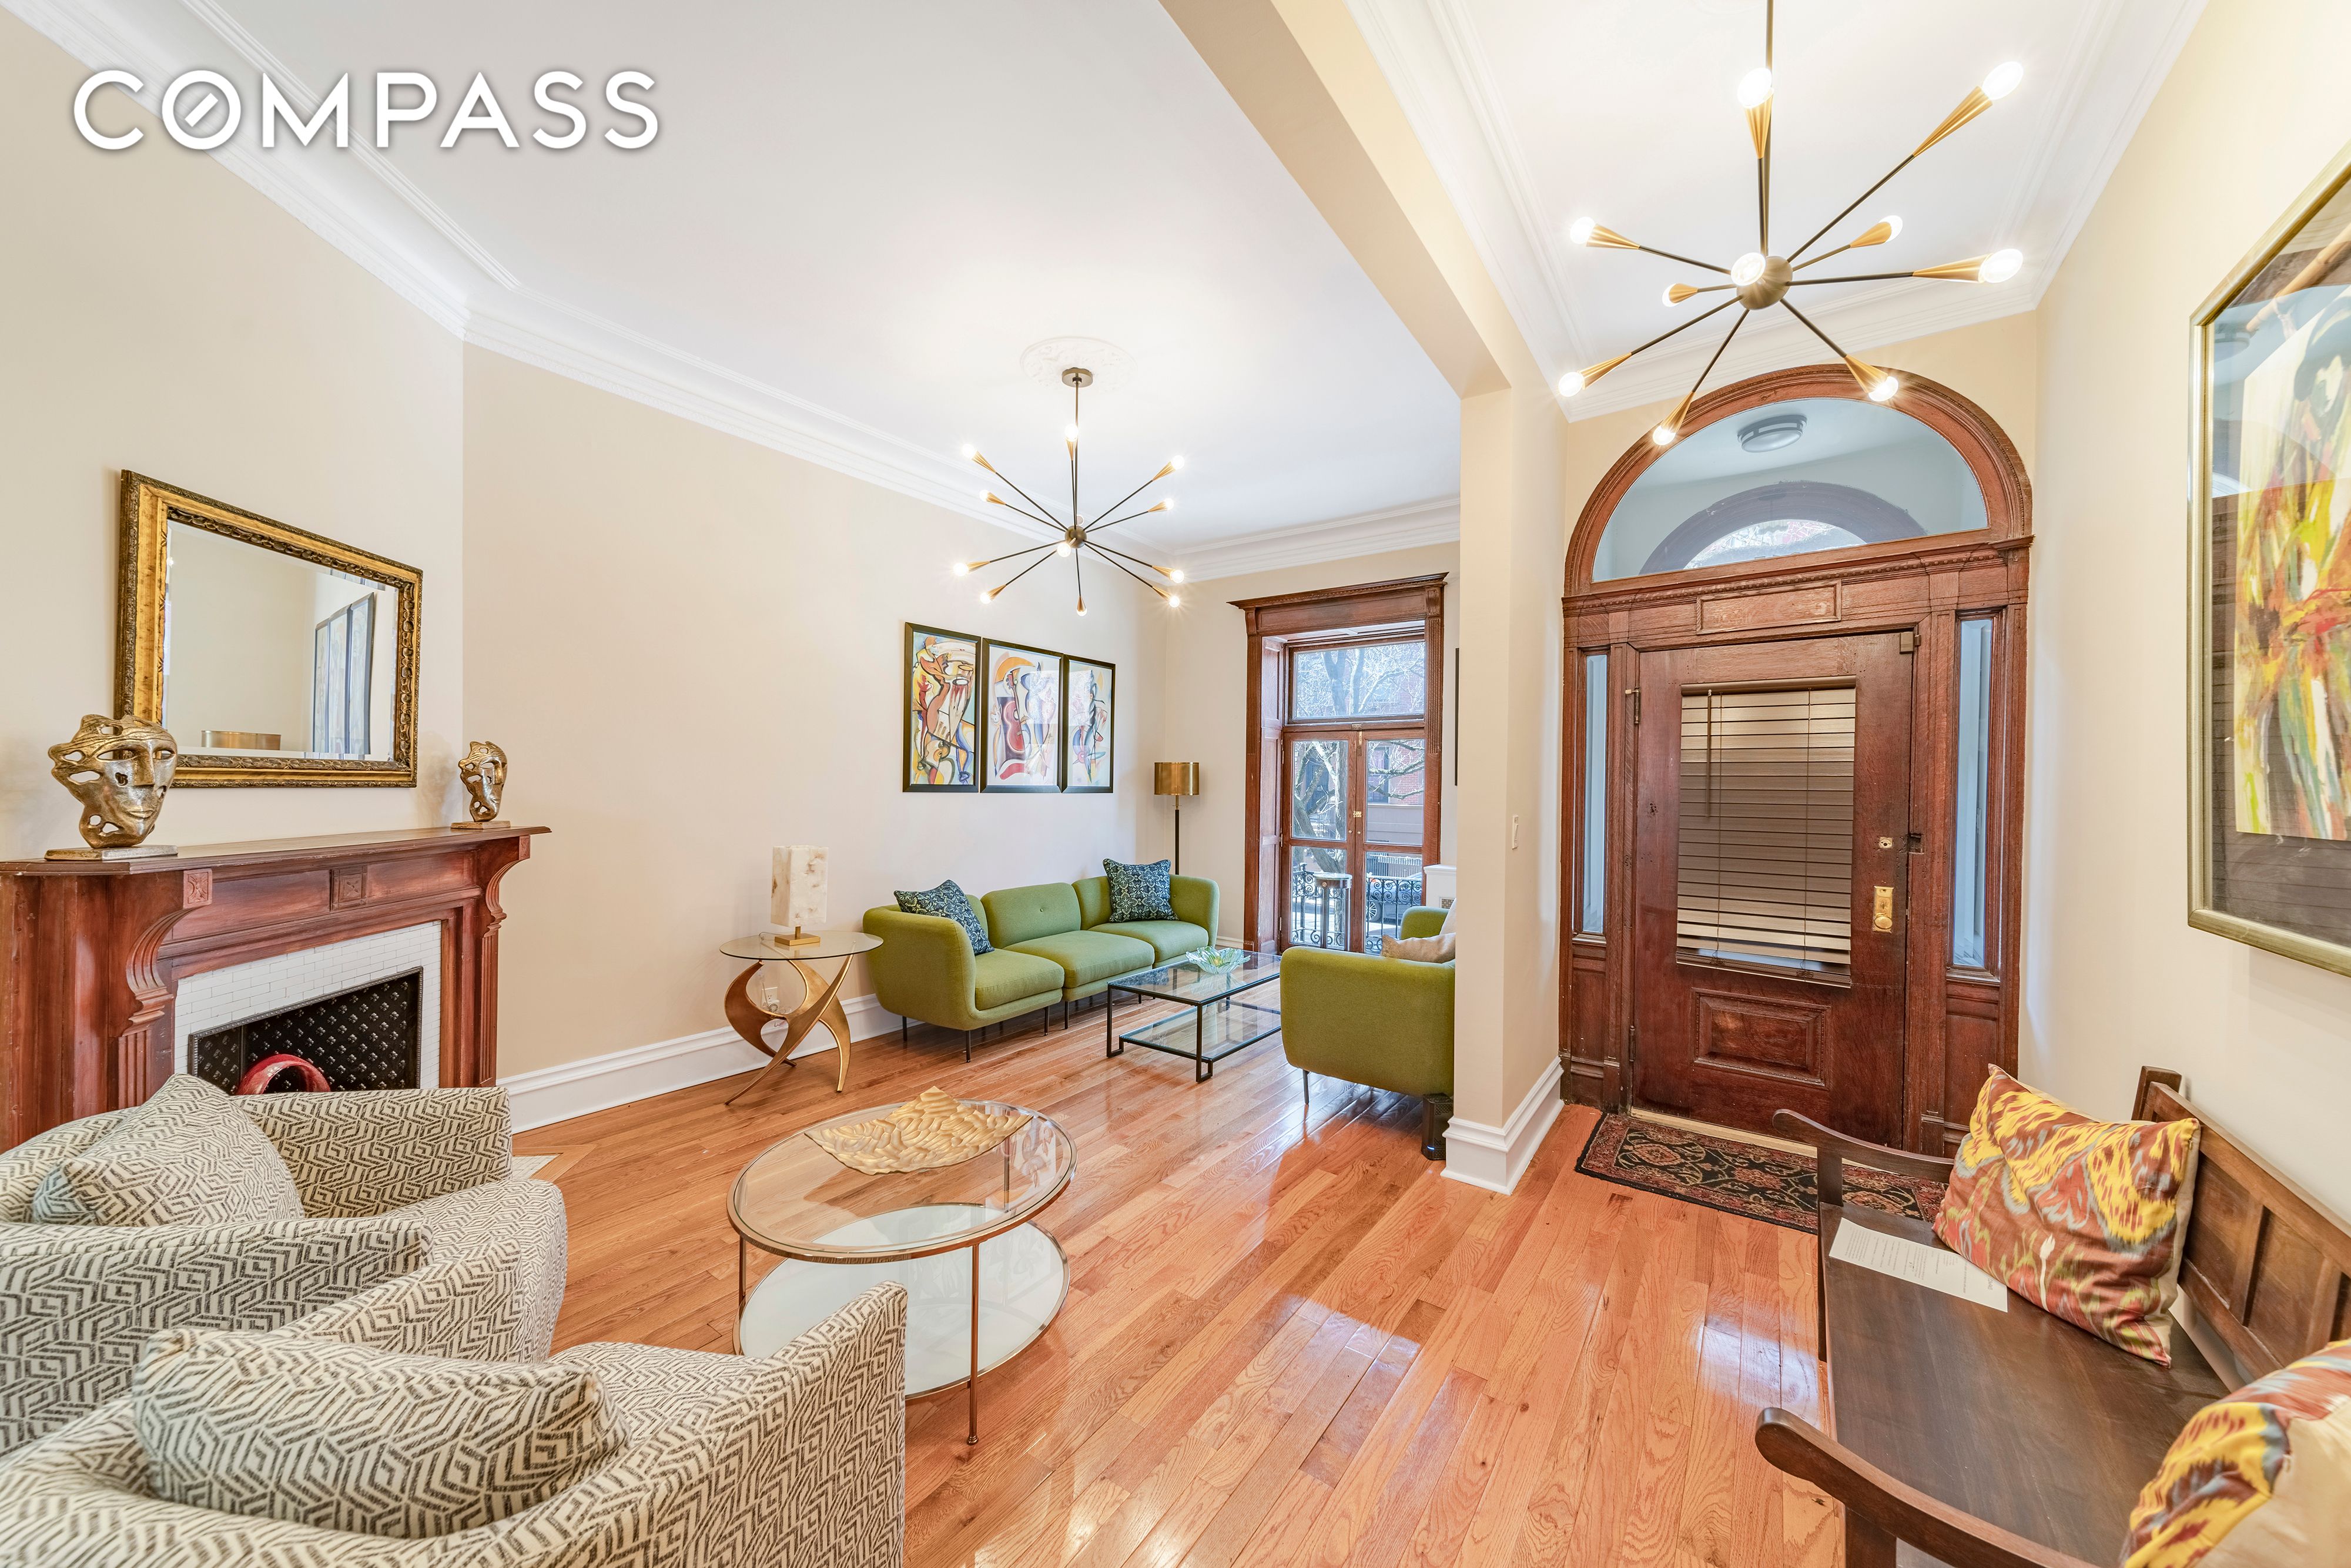 215 West 138th Street, Central Harlem, Upper Manhattan, NYC - 6 Bedrooms  
4 Bathrooms  
12 Rooms - 